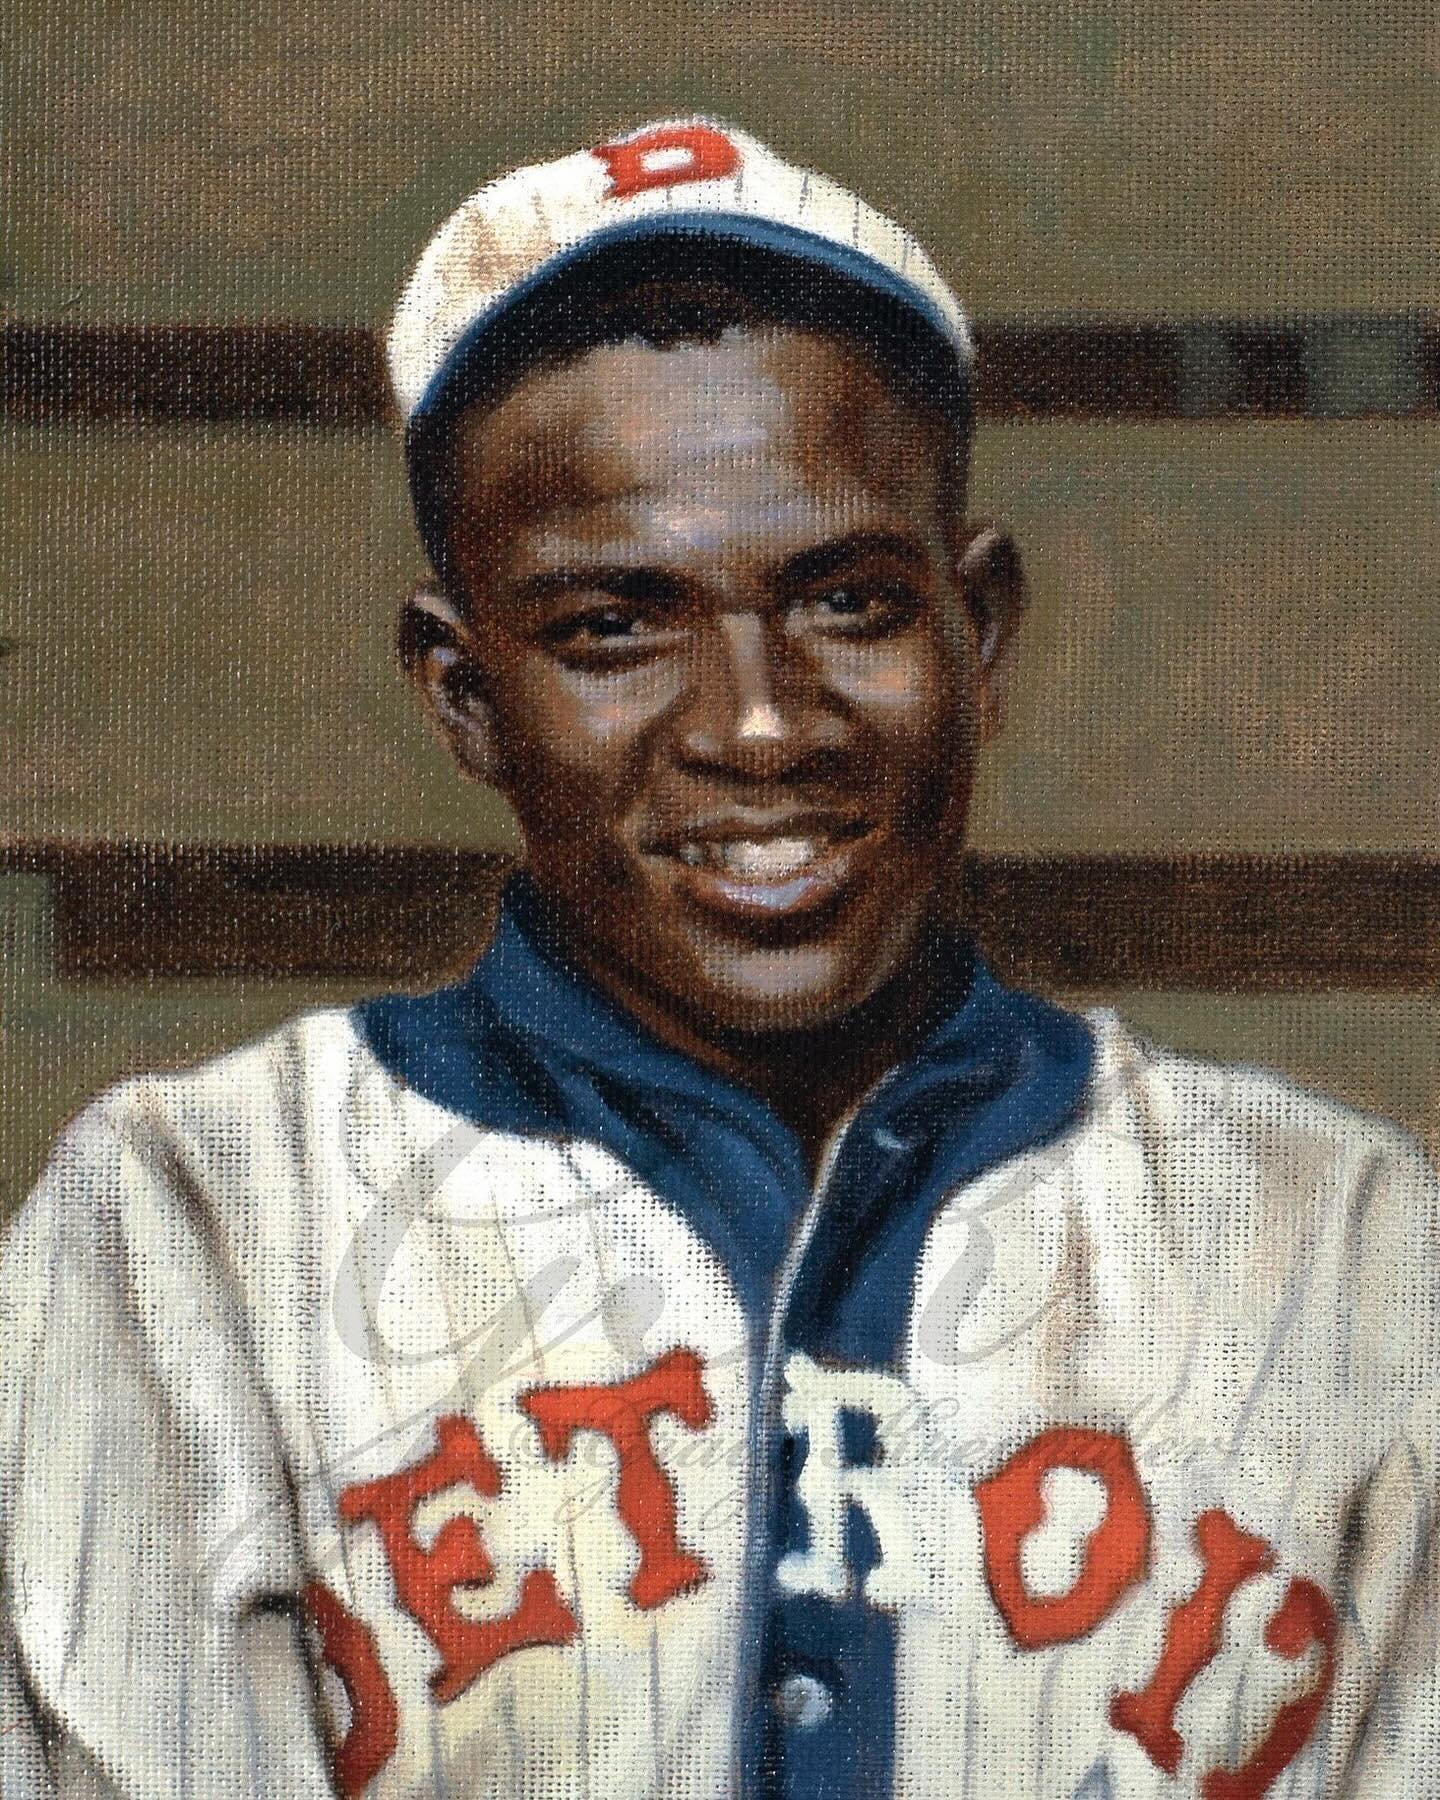 On this day in 1898, Andy Cooper was born in Waco, TX. A solid control pitcher, &ldquo;Lefty&rdquo; was a top starter during his early years, and eventually became a stellar reliever. Here&rsquo;s a color study of him with the Detroit Stars in 1920.
